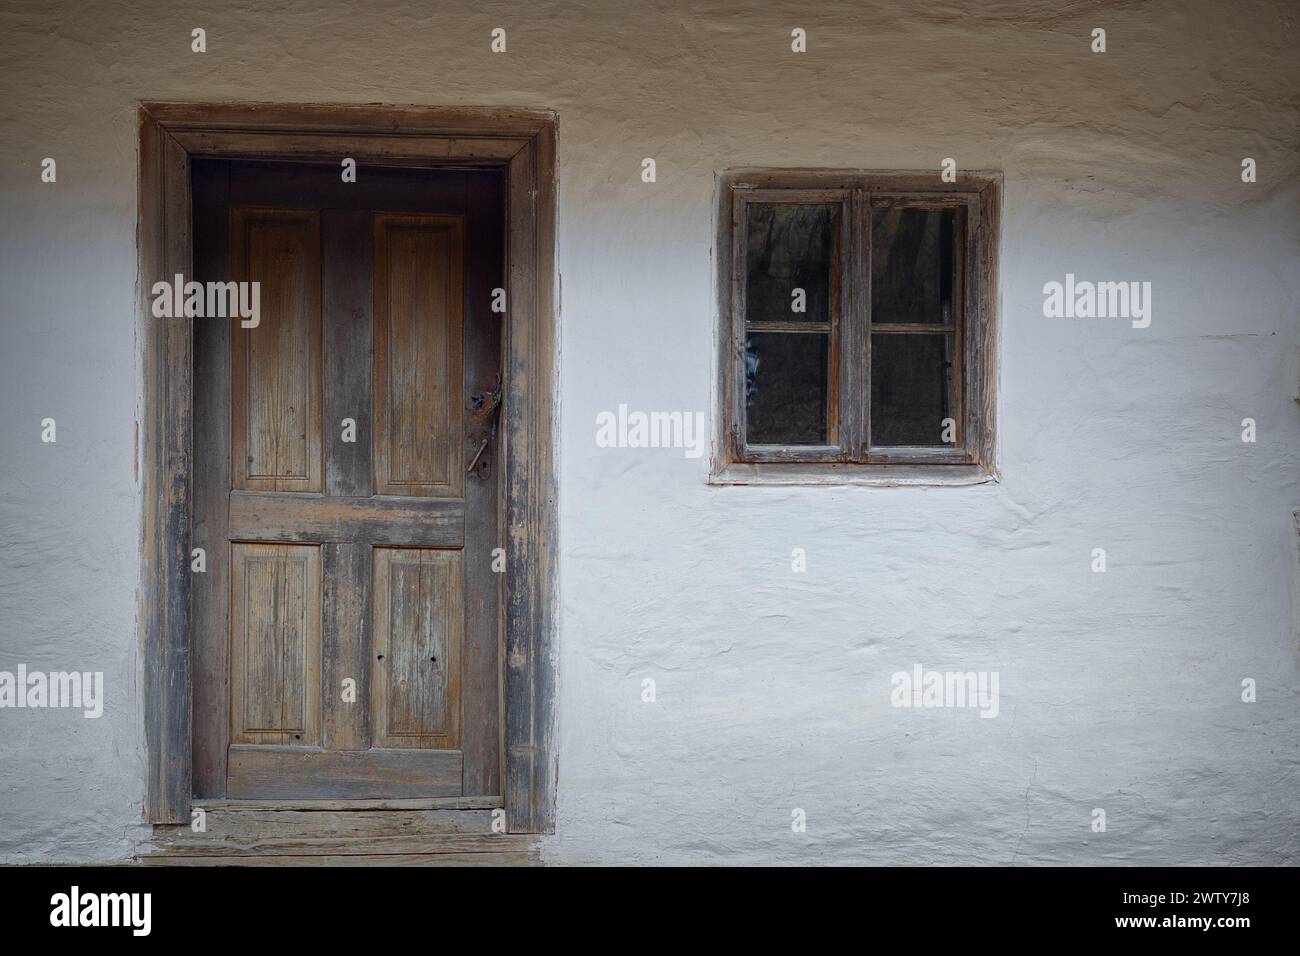 facade of old traditional transylvanian house, minimalistic view Stock Photo